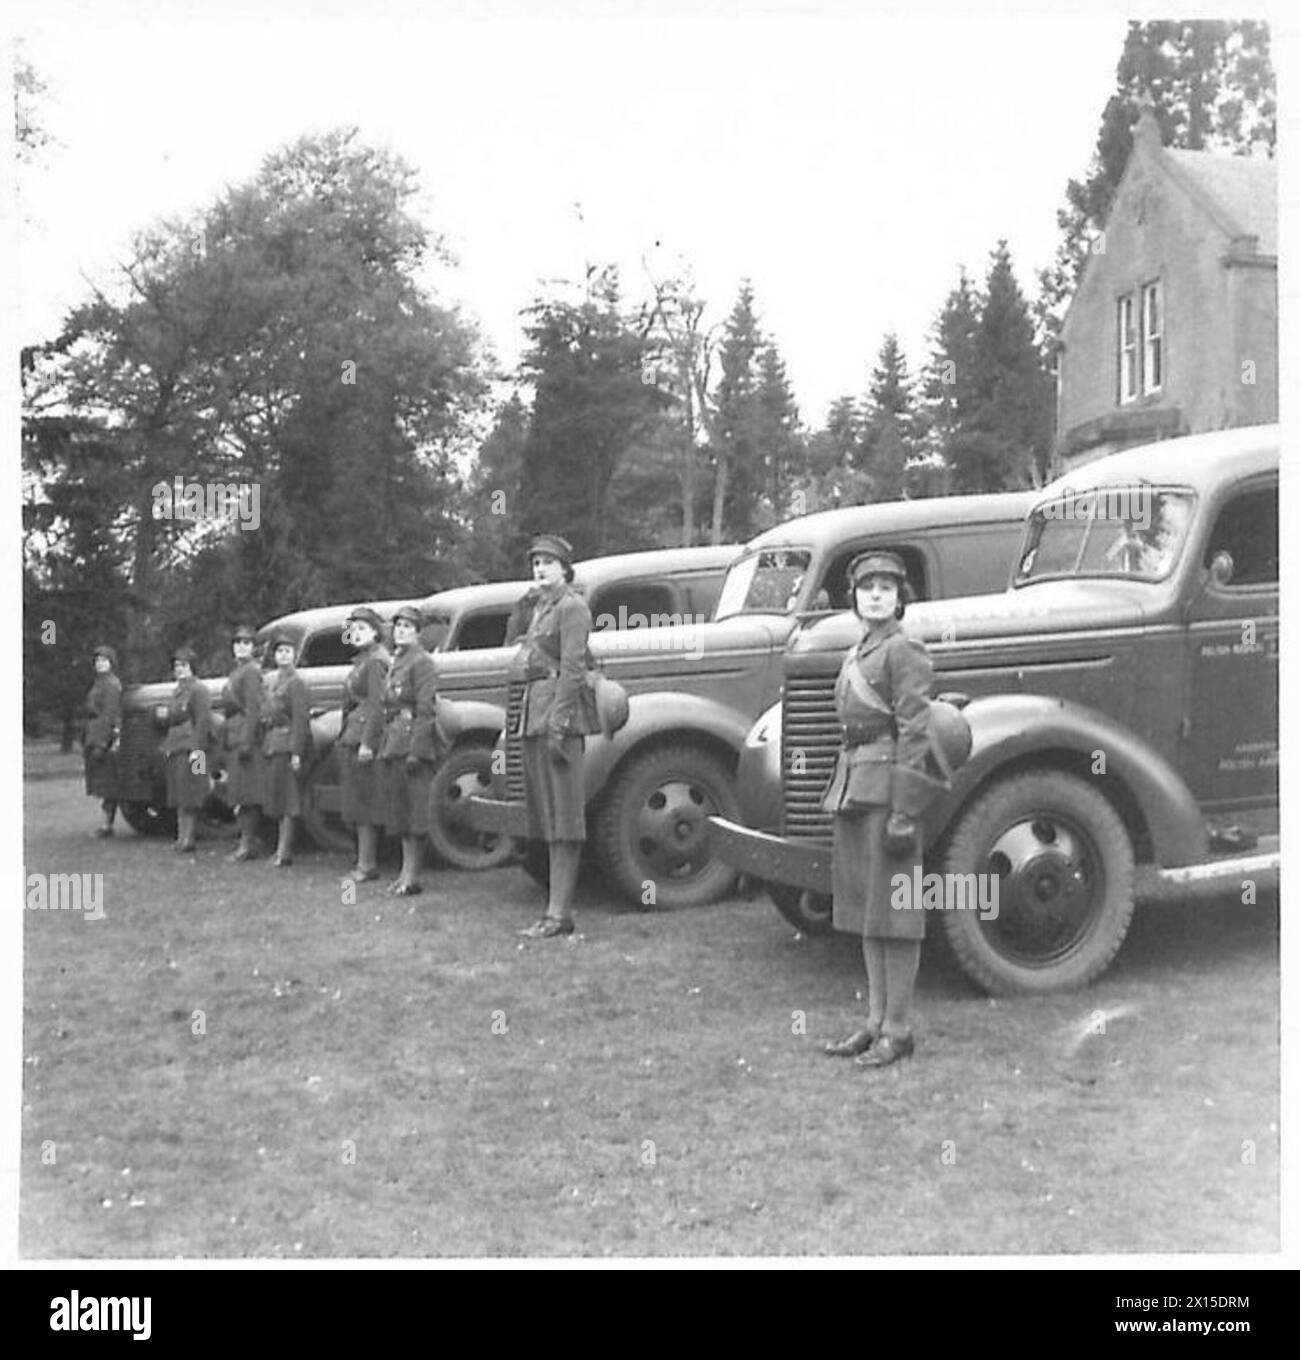 THE POLISH ARMY IN BRITAIN, 1940-1947 - Diana Napier was a well known actress and wife of Richard Tauber, the Austrian-born opera singer, in her private life. Female drivers of the First Aid Nursing Yeomanry (FANY) unit attached to the 1st Polish Corps (commanded by Diana Napier) by their ambulances at Cupar, 1 June 1941 British Army, British Army, First Aid Nursing Yeomanry, Polish Army, Polish Armed Forces in the West, 1st Corps Stock Photo